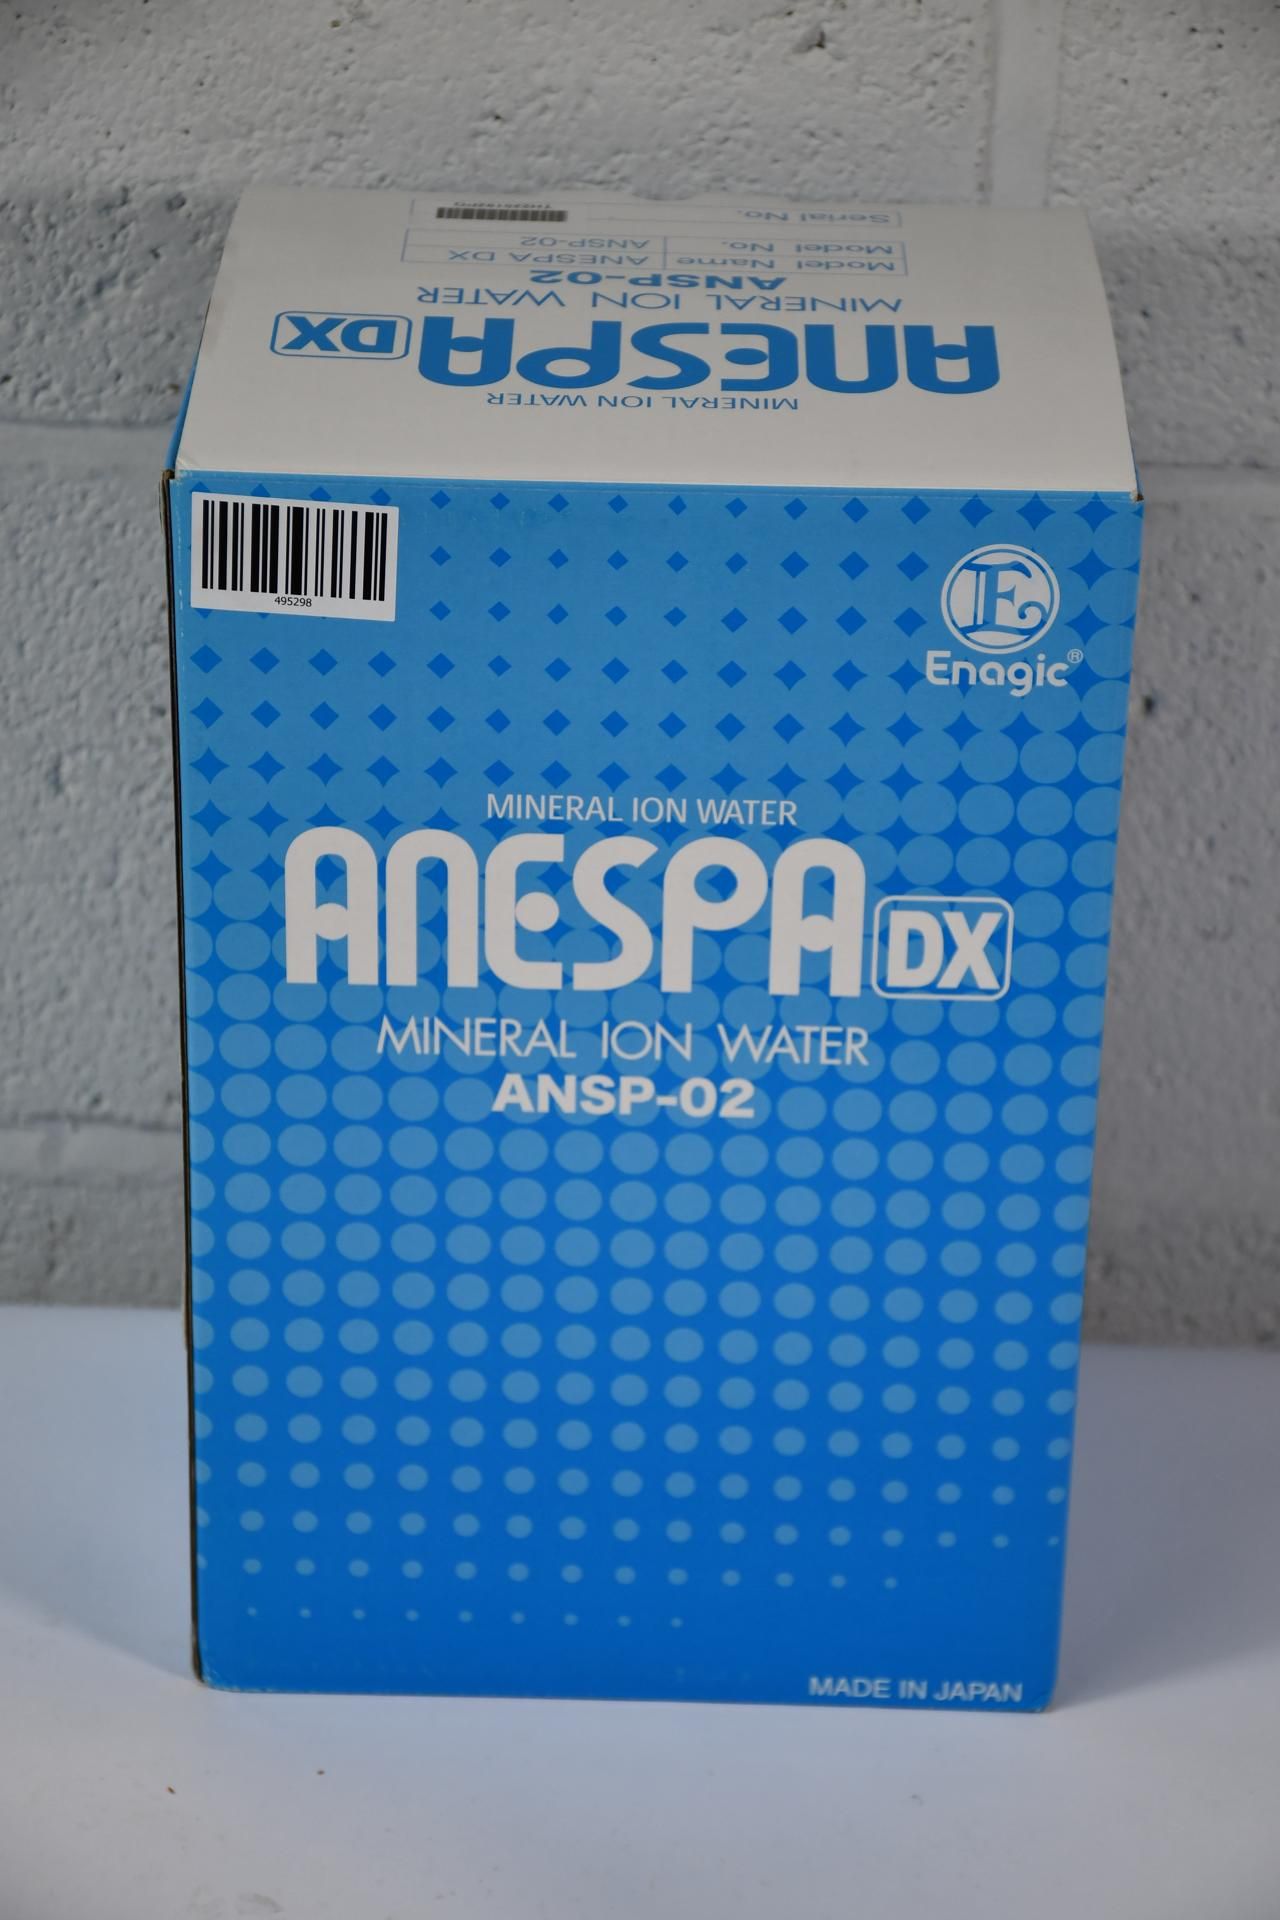 Enagic Anespa DX Mineral ION Water (ANSP-02) (Serial Number TH225192PG).